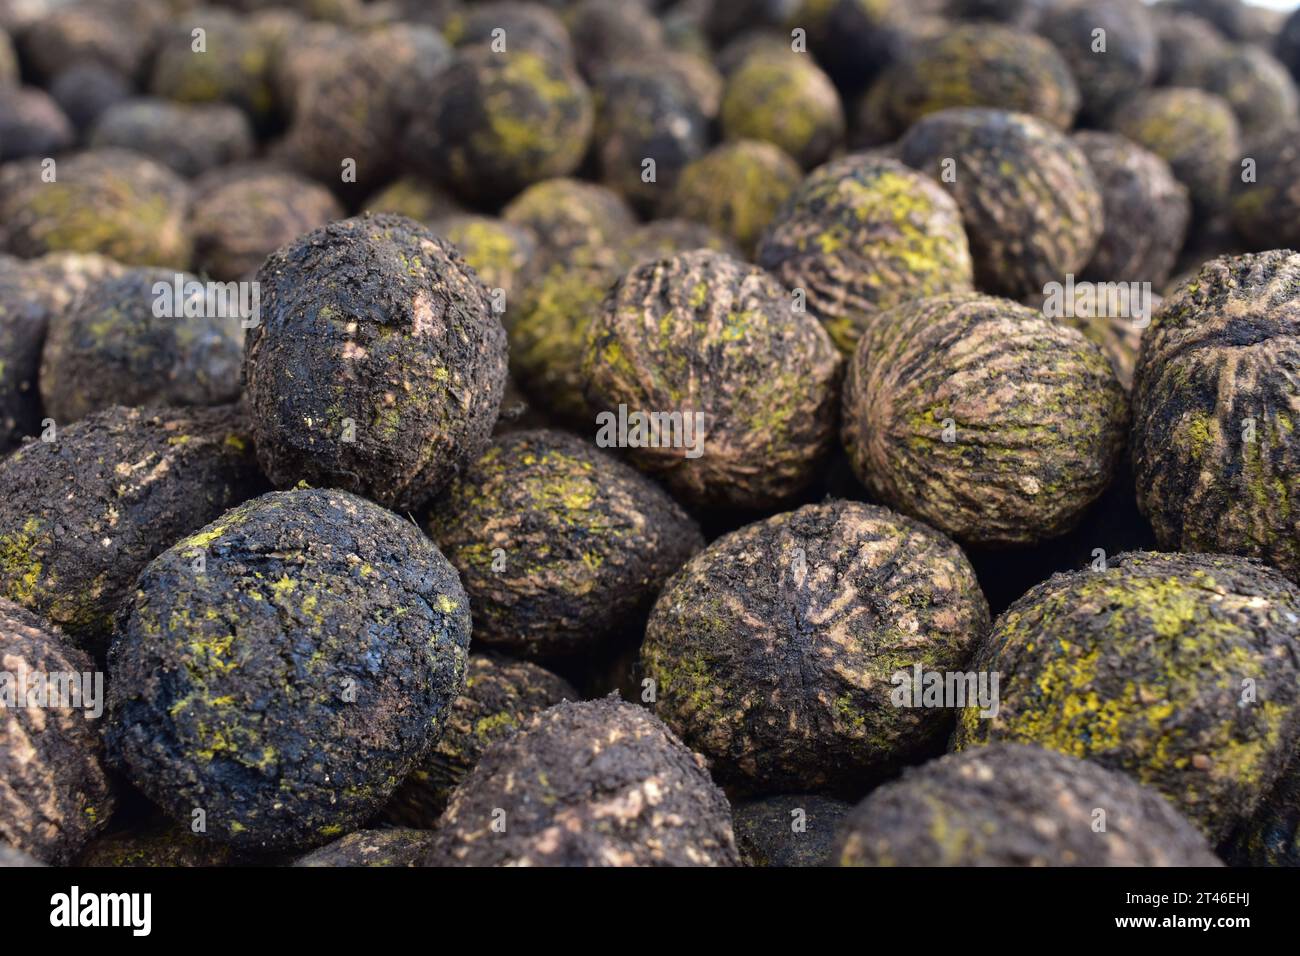 A pile of fresh black walnuts, hulled and placed in a rack for drying. Eastern Black Walnut, Juglans Nigra, a native nut tree found in North America Stock Photo